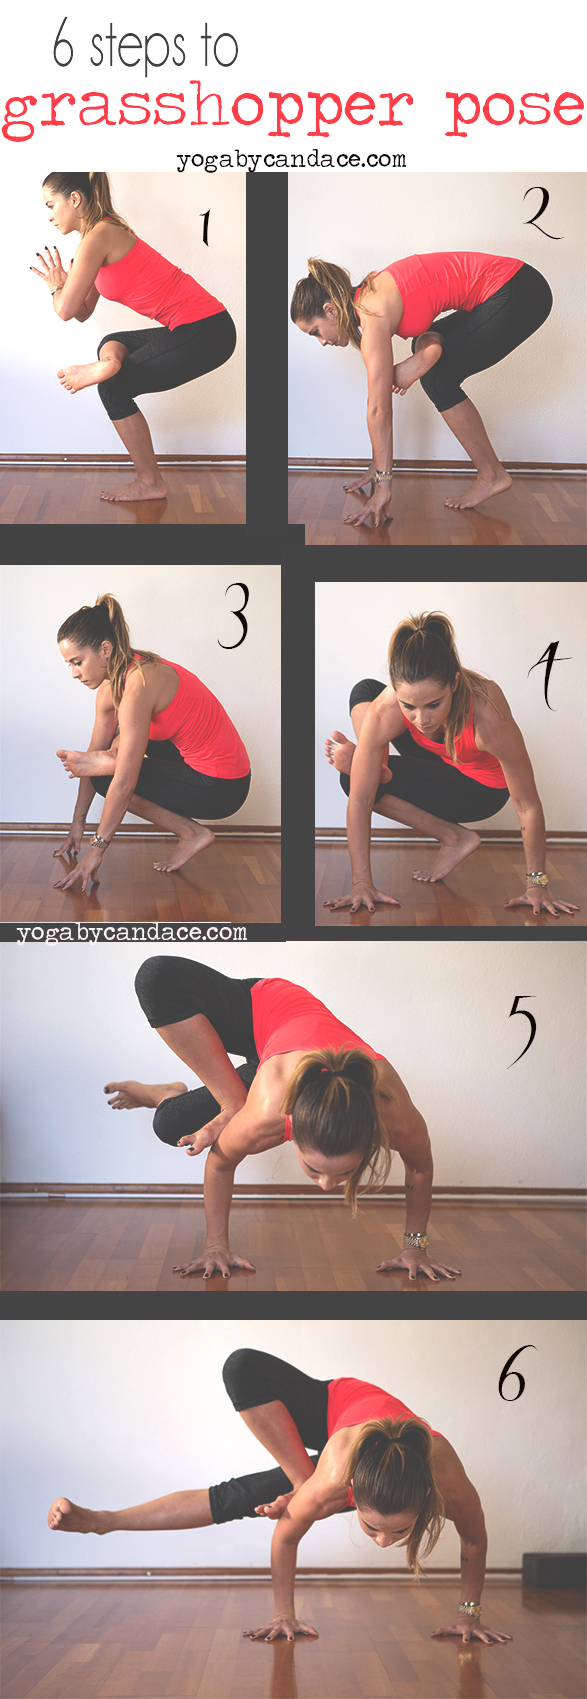 7 Simple Steps to Intelligent Yoga Class Sequencing - BlissfulYogini.com